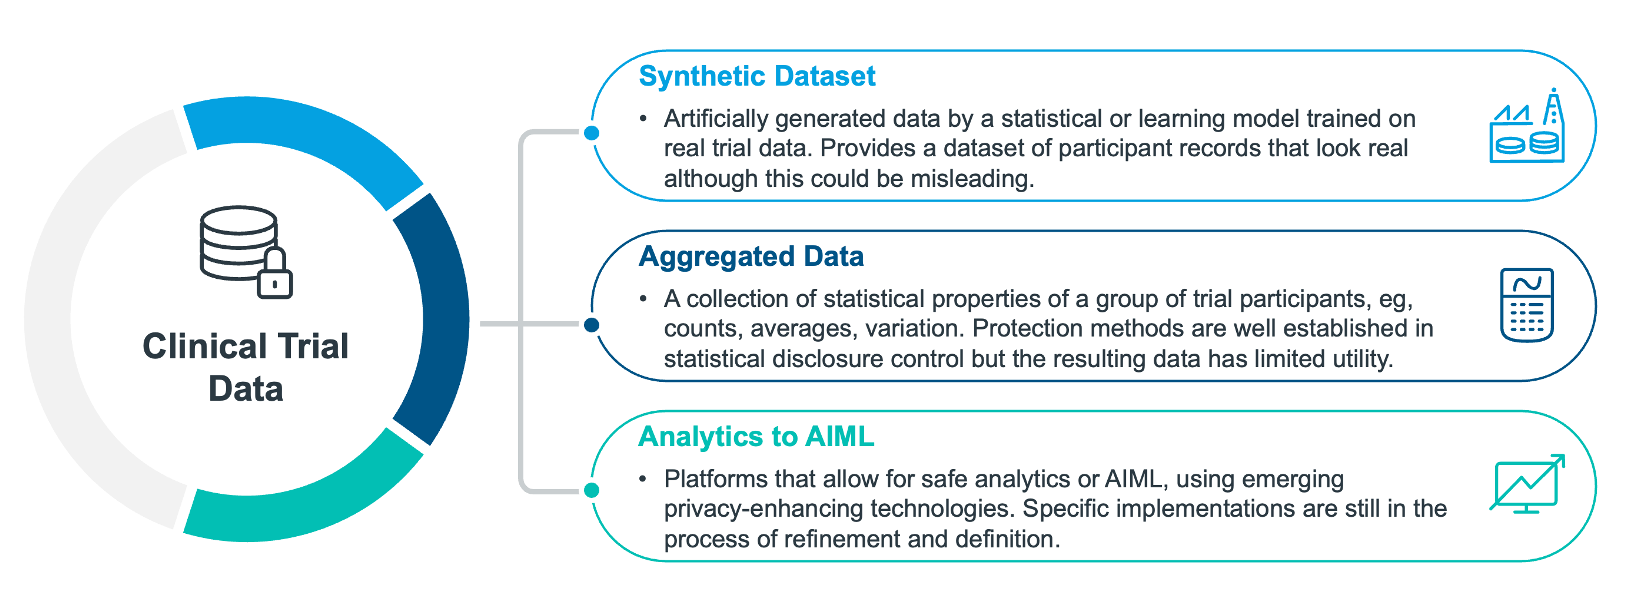 Figure 2. Various options for producing useful statistics, including synthetic datasets, aggregated data, and specialized Analytics or AIML platforms.